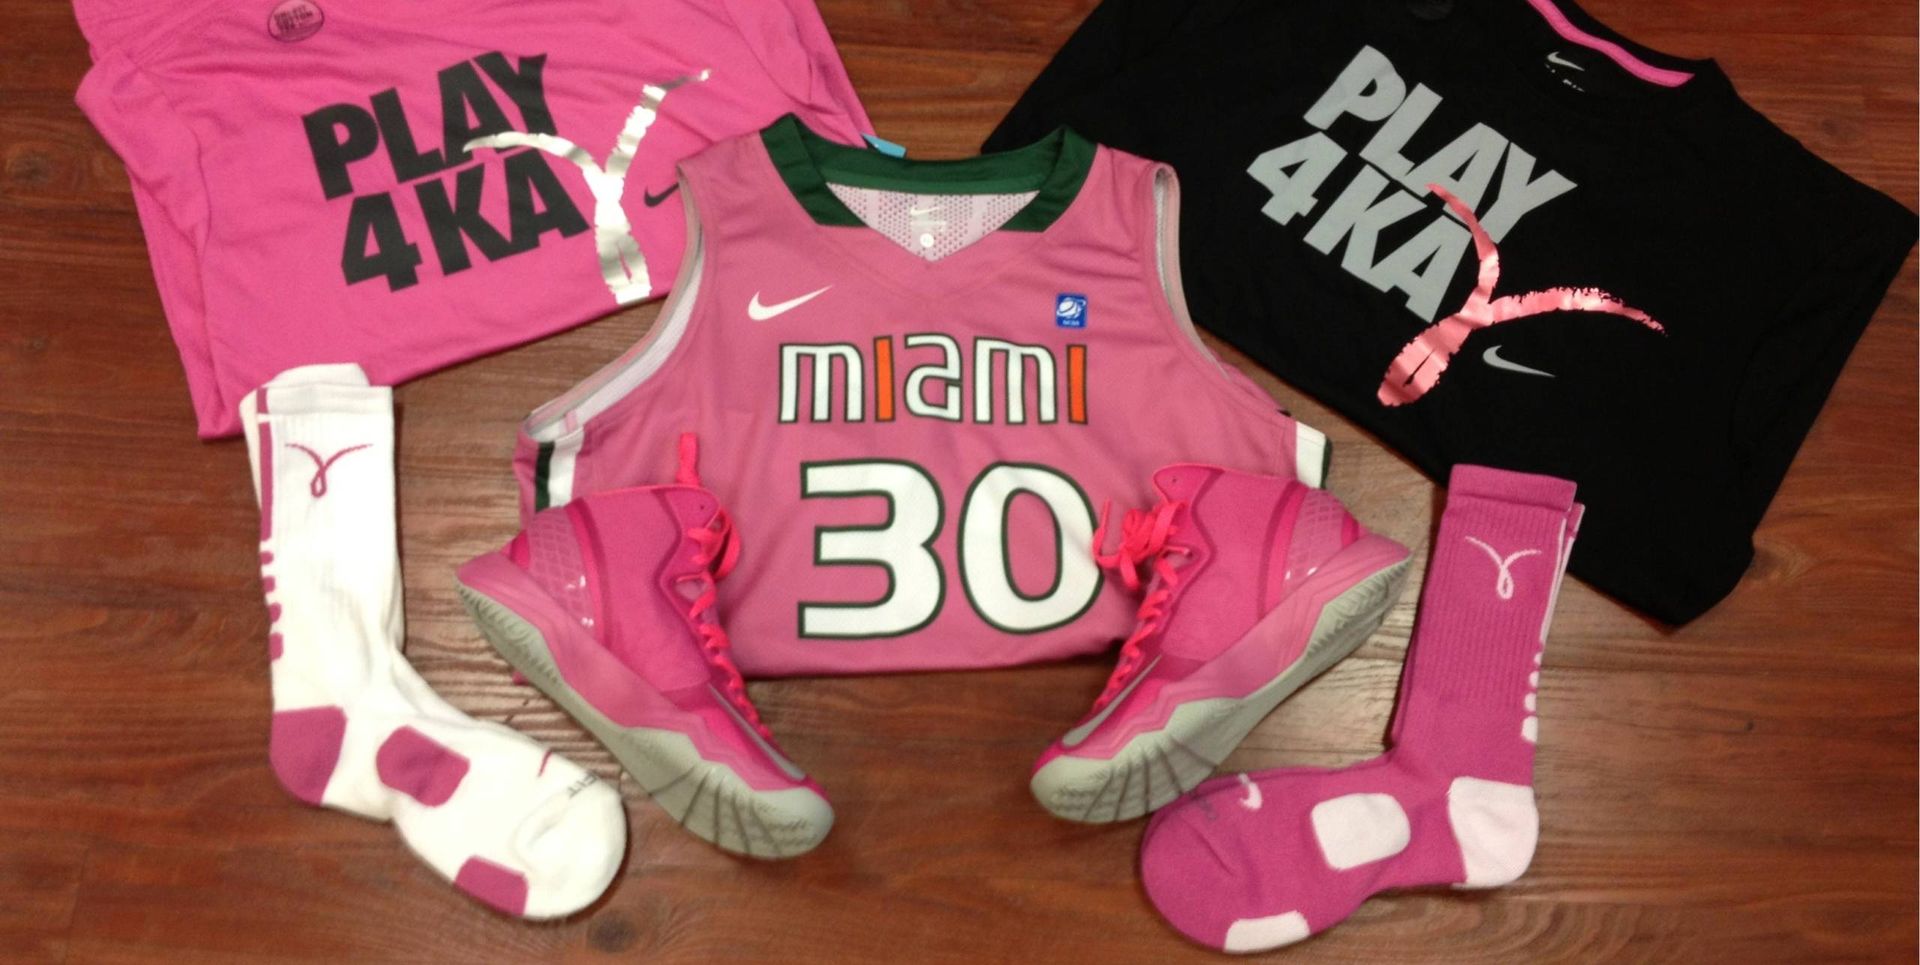 WBB to Participate in Play 4Kay Initiative